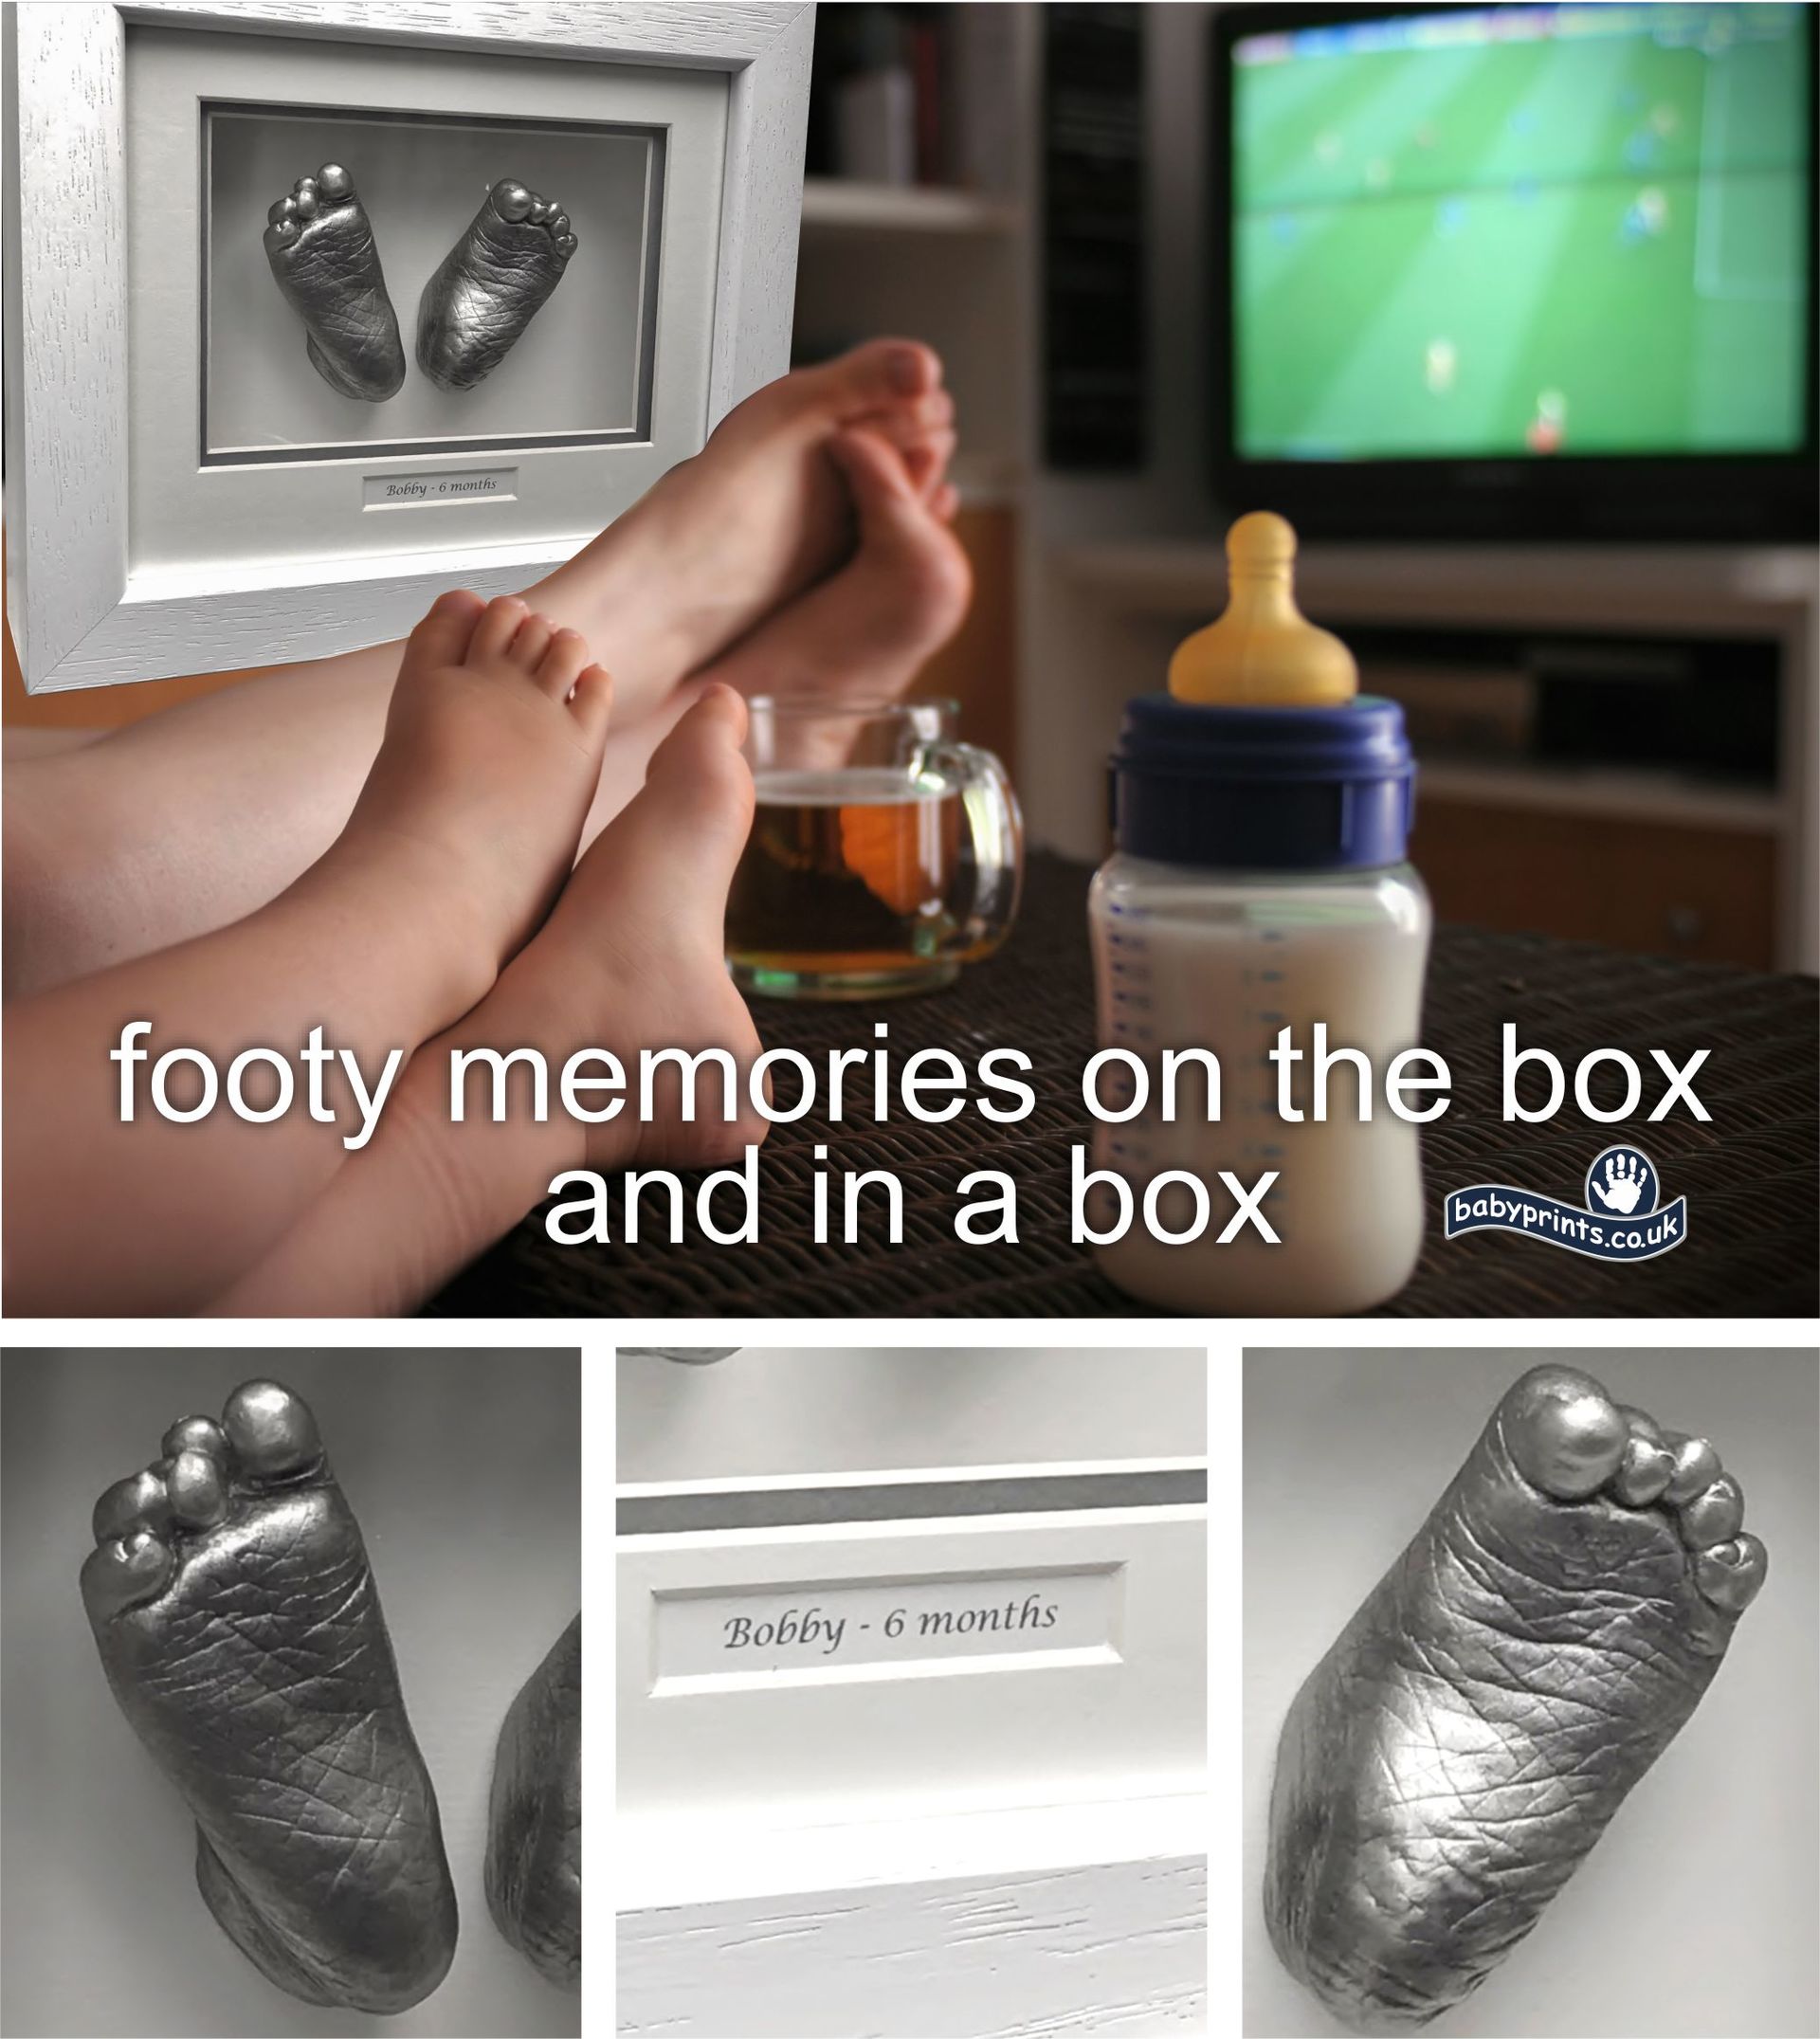 Footy memories on the box